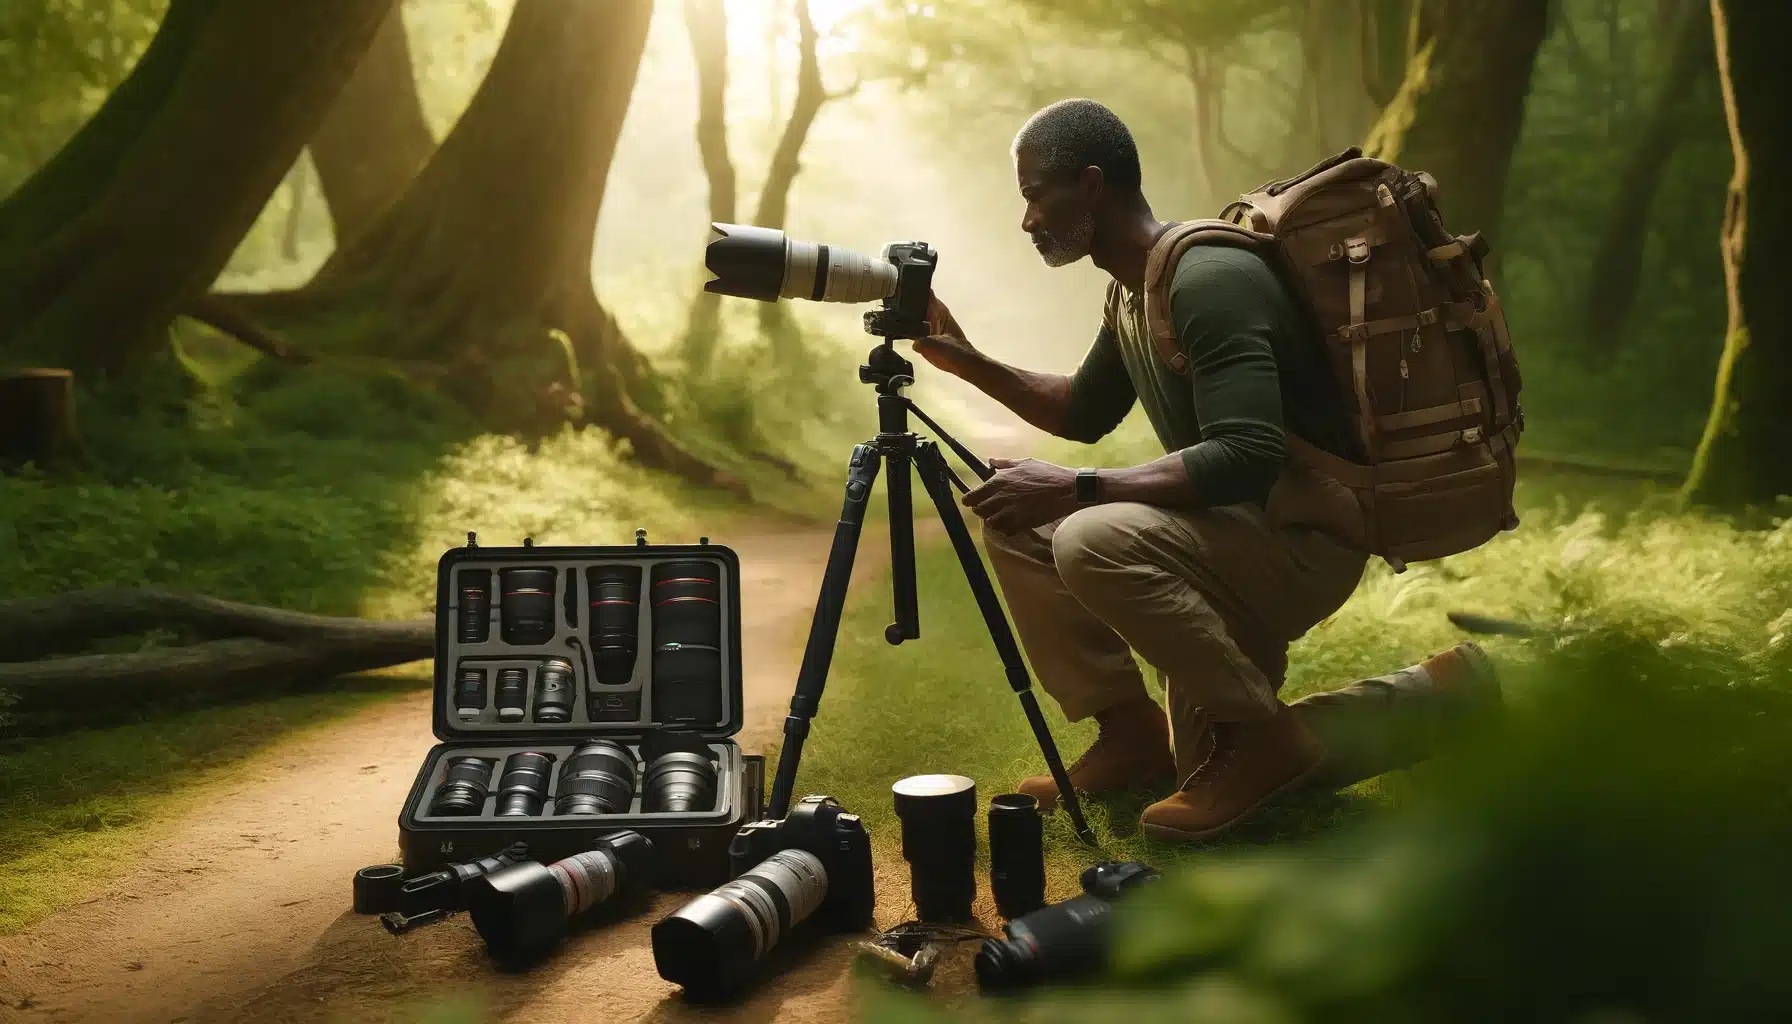 A middle-aged African male wildlife photographer sets up his camera on a tripod amidst a lush forest, surrounded by various photography equipment, demonstrating essential wildlife photography tools for capturing nature.